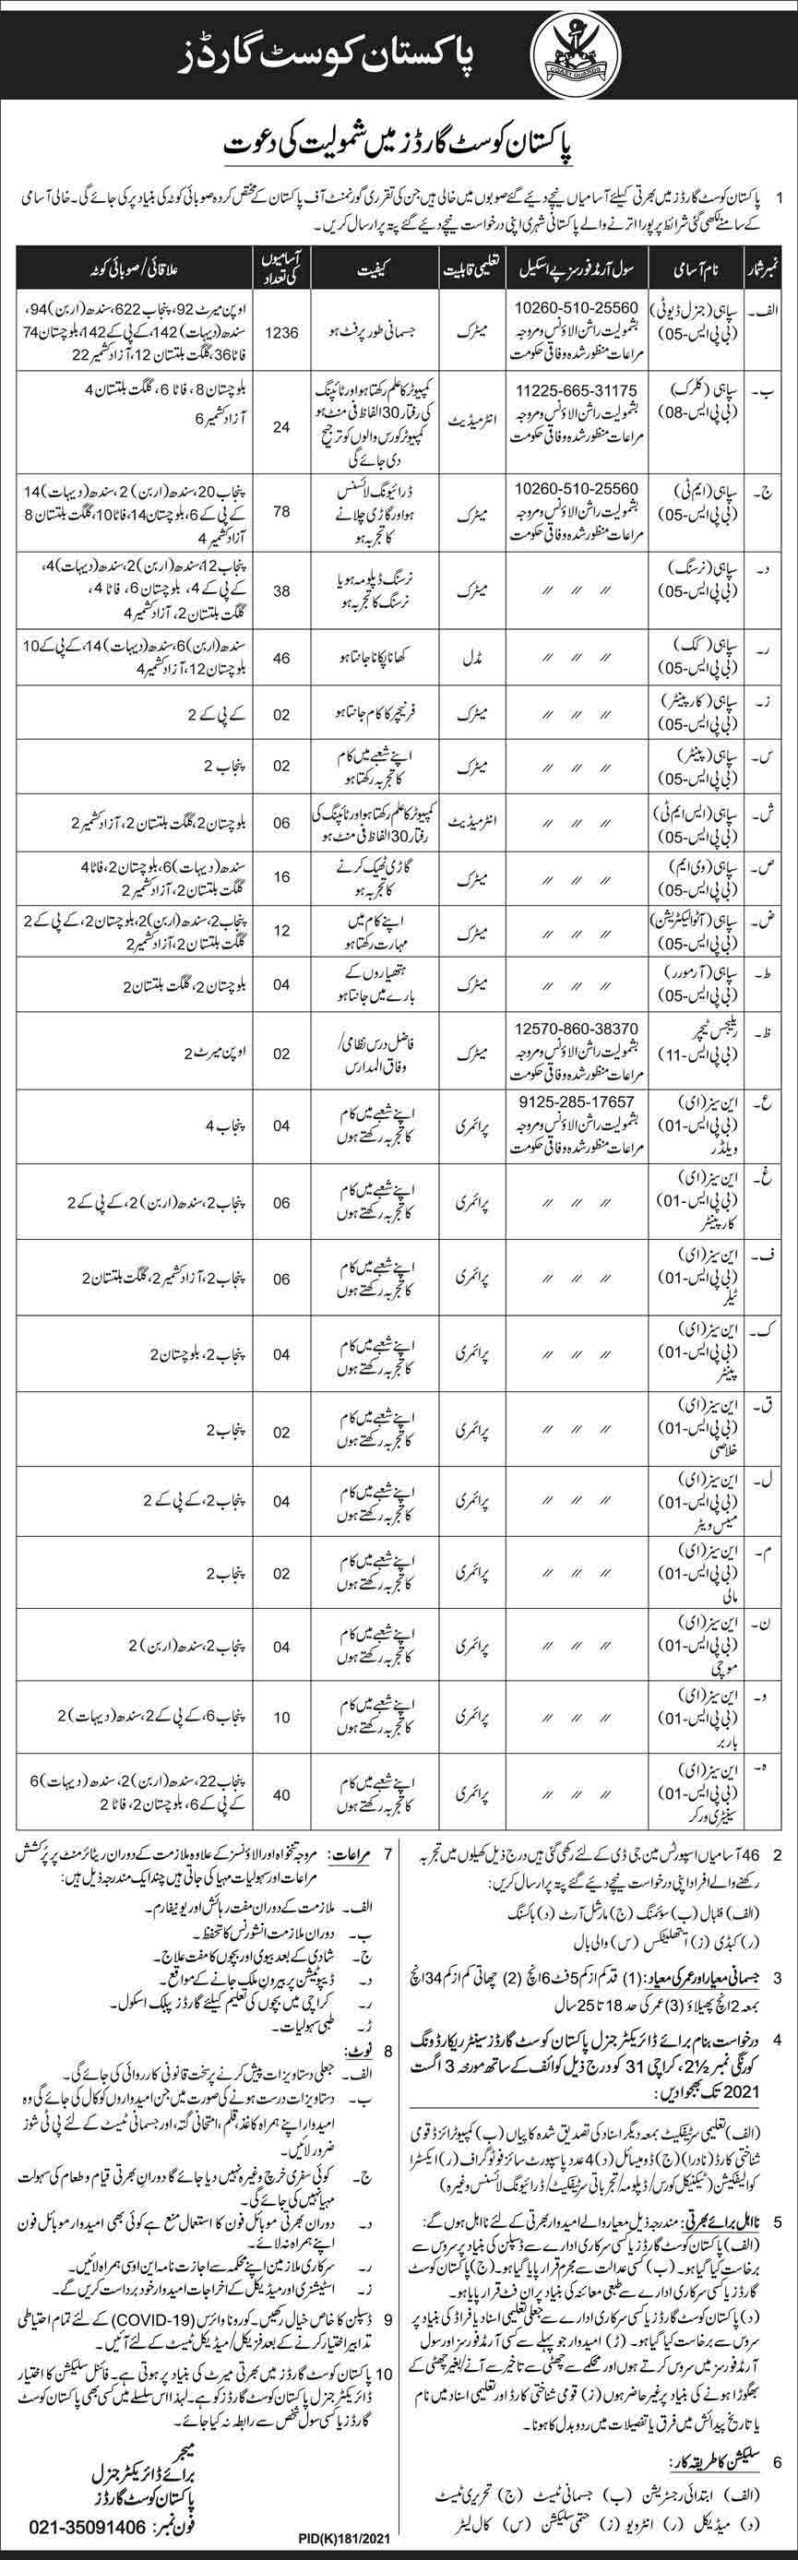 Pakistan Coast Guard Jobs 2021 For Medical And Education Officer